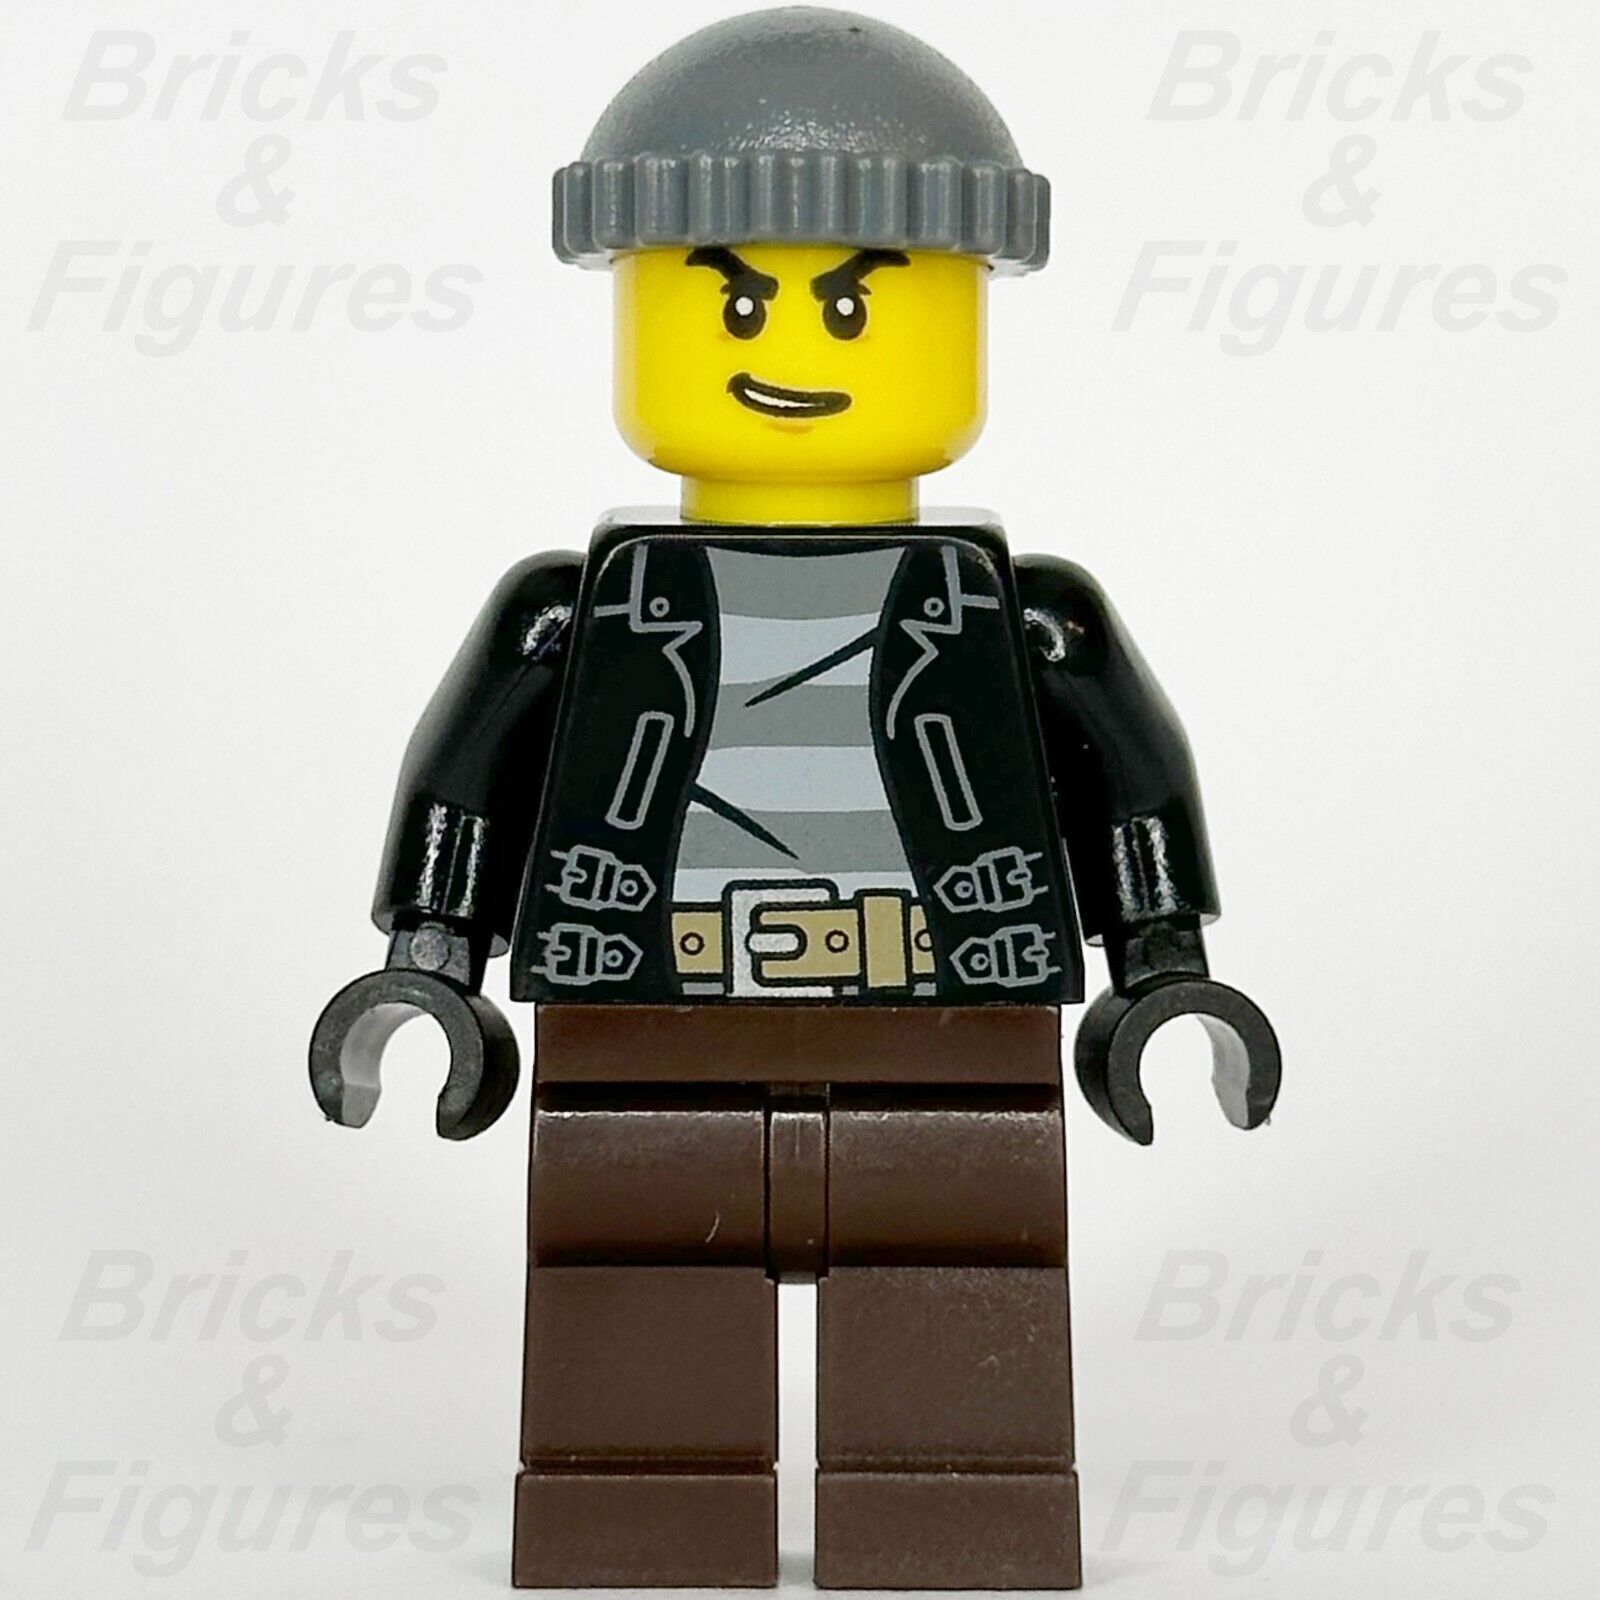 LEGO City Bandit Crook Minifigure Police Town Minifig Male Beanie 60245 cty1133 - Bricks & Figures